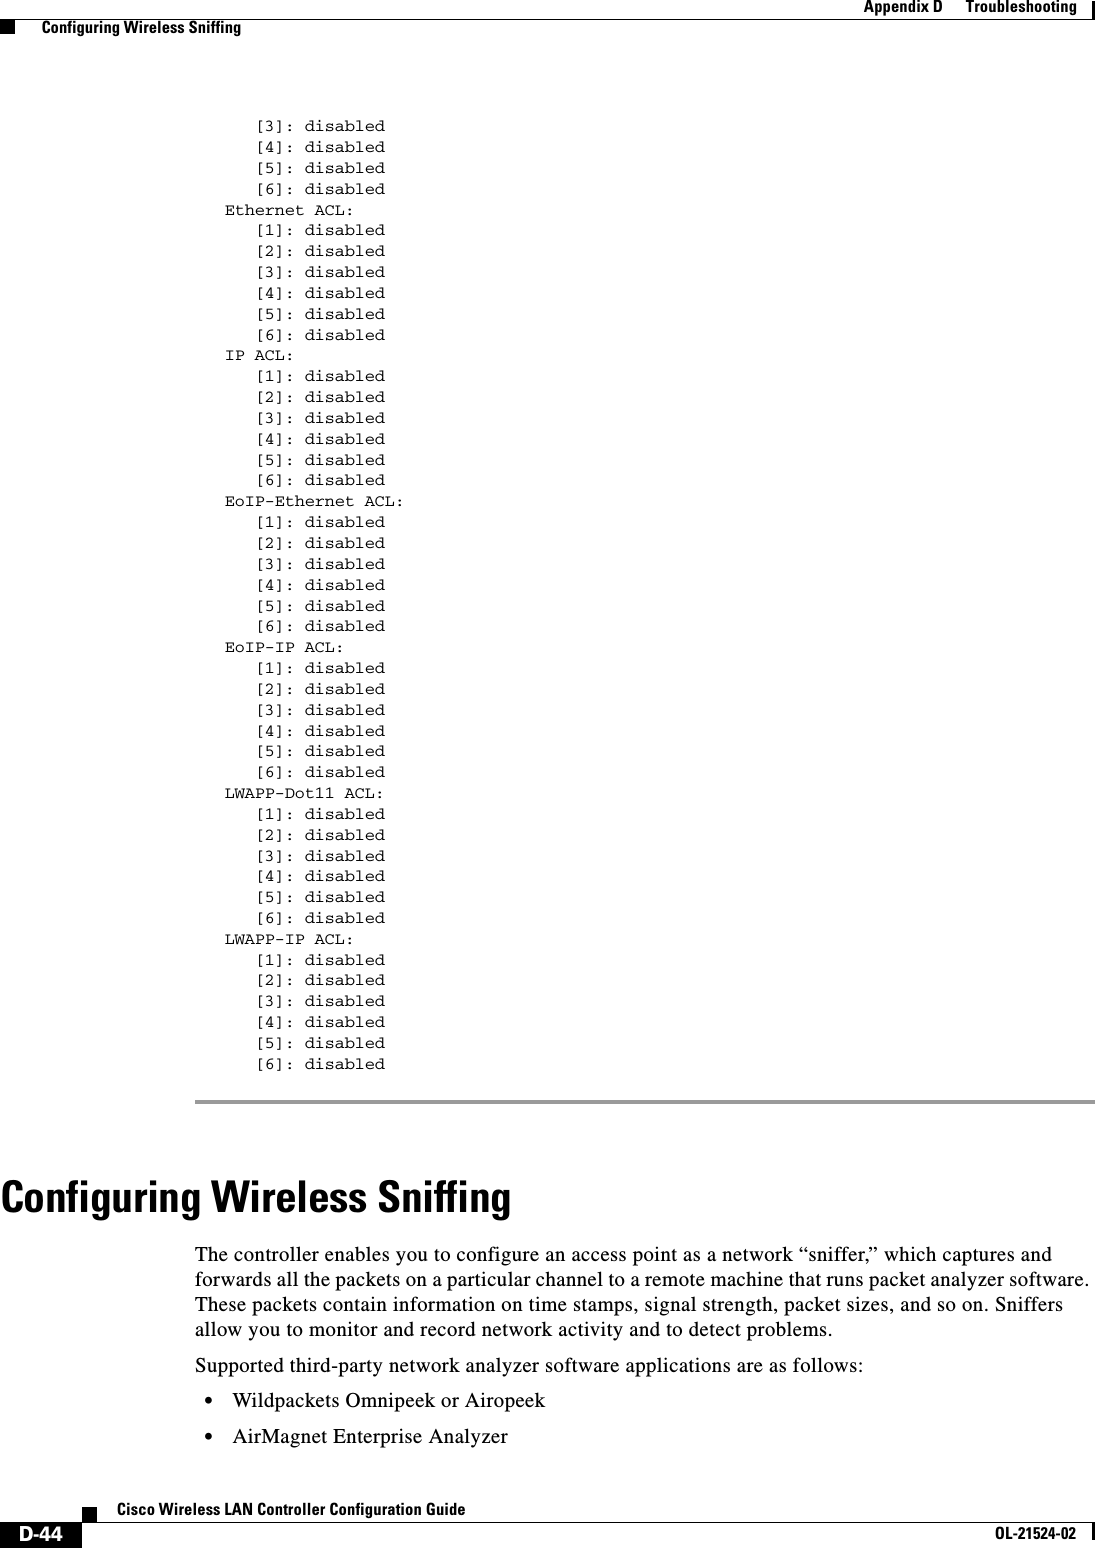  D-44Cisco Wireless LAN Controller Configuration GuideOL-21524-02Appendix D      Troubleshooting  Configuring Wireless Sniffing      [3]: disabled                         [4]: disabled                         [5]: disabled                         [6]: disabled                      Ethernet ACL:                      [1]: disabled                         [2]: disabled                         [3]: disabled                         [4]: disabled                         [5]: disabled                         [6]: disabled                      IP ACL:                [1]: disabled       [2]: disabled                         [3]: disabled                         [4]: disabled                         [5]: disabled                         [6]: disabled                      EoIP-Ethernet ACL:                           [1]: disabled                         [2]: disabled                         [3]: disabled                         [4]: disabled                         [5]: disabled                         [6]: disabled                      EoIP-IP ACL:      [1]: disabled      [2]: disabled      [3]: disabled      [4]: disabled      [5]: disabled      [6]: disabled   LWAPP-Dot11 ACL:      [1]: disabled      [2]: disabled      [3]: disabled      [4]: disabled      [5]: disabled      [6]: disabled   LWAPP-IP ACL:      [1]: disabled      [2]: disabled      [3]: disabled      [4]: disabled      [5]: disabled      [6]: disabled Configuring Wireless SniffingThe controller enables you to configure an access point as a network “sniffer,” which captures and forwards all the packets on a particular channel to a remote machine that runs packet analyzer software. These packets contain information on time stamps, signal strength, packet sizes, and so on. Sniffers allow you to monitor and record network activity and to detect problems.Supported third-party network analyzer software applications are as follows:  • Wildpackets Omnipeek or Airopeek  • AirMagnet Enterprise Analyzer